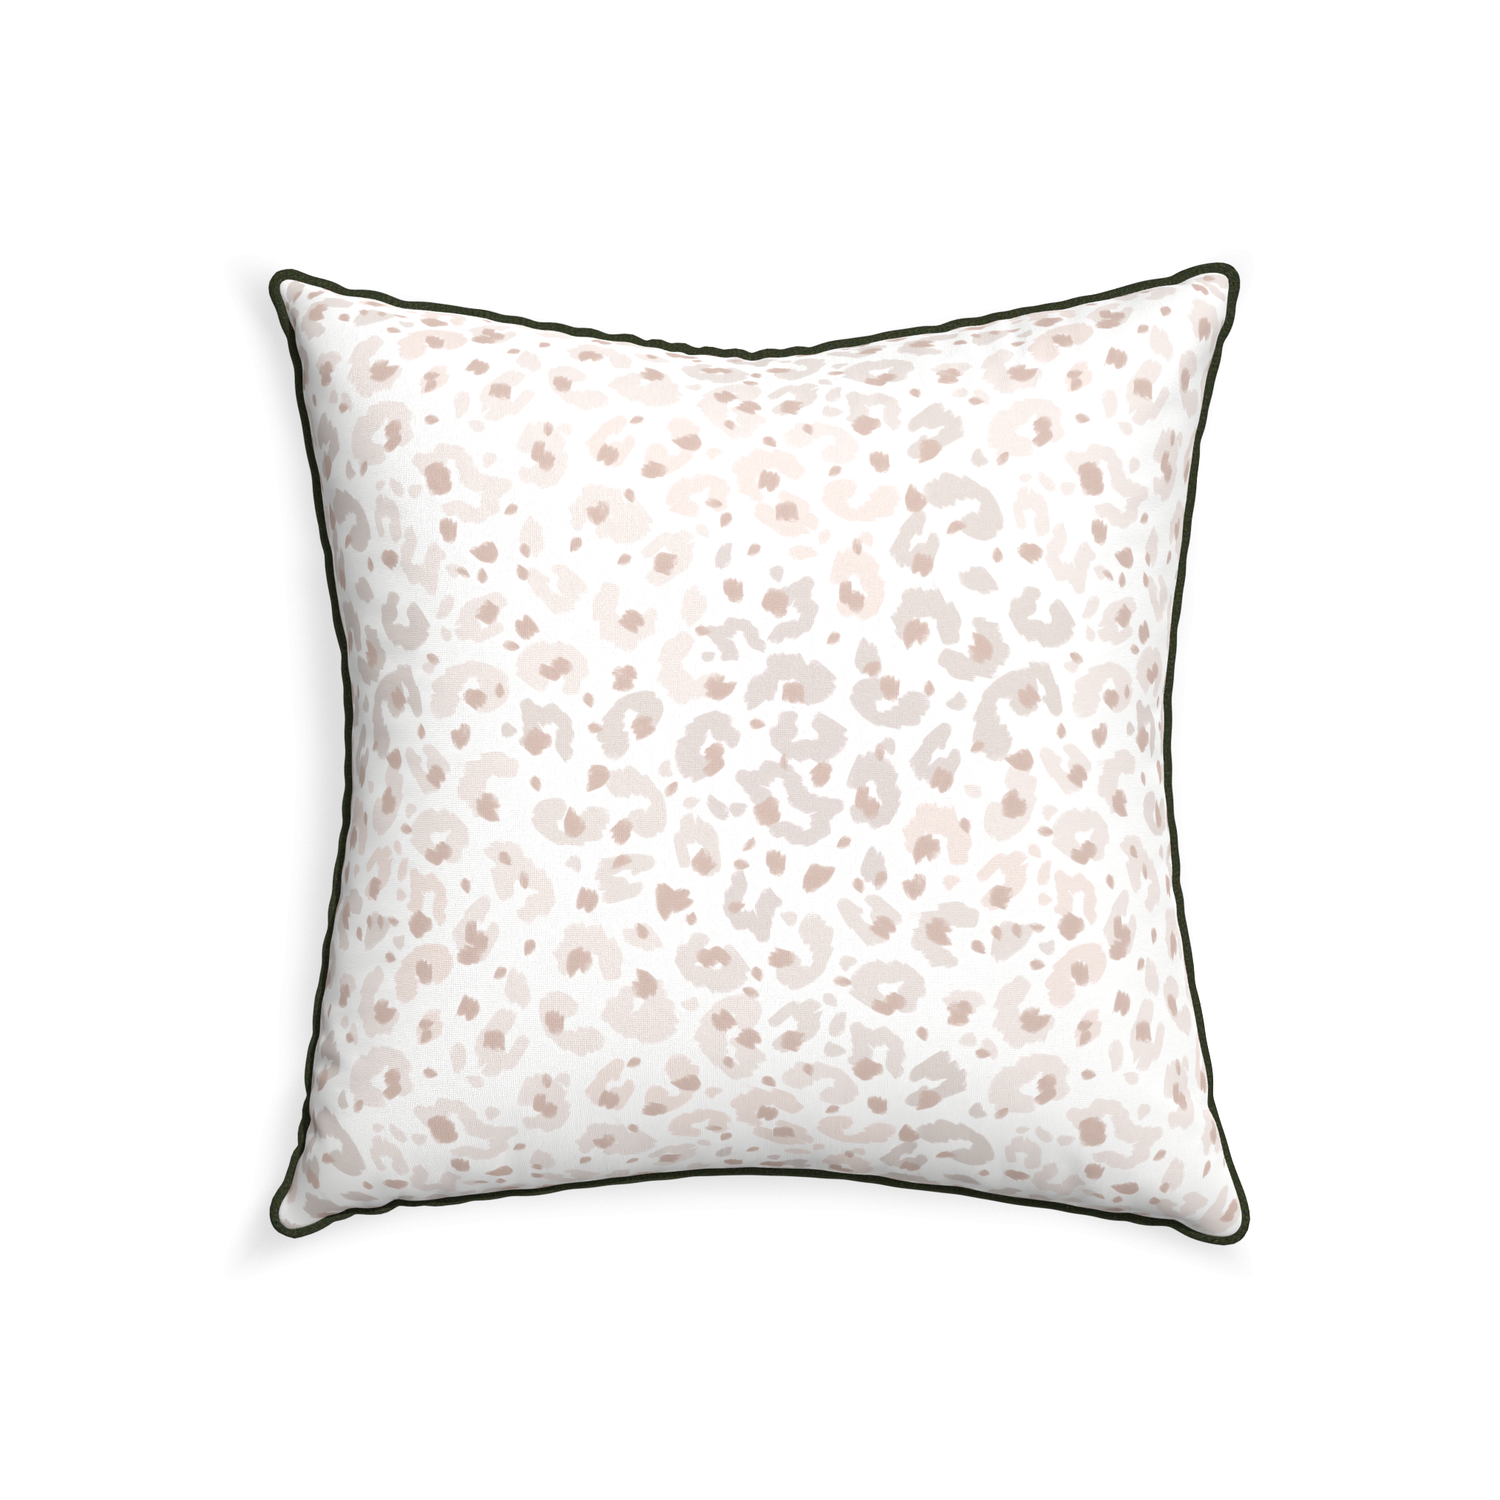 22-square rosie custom beige animal printpillow with f piping on white background